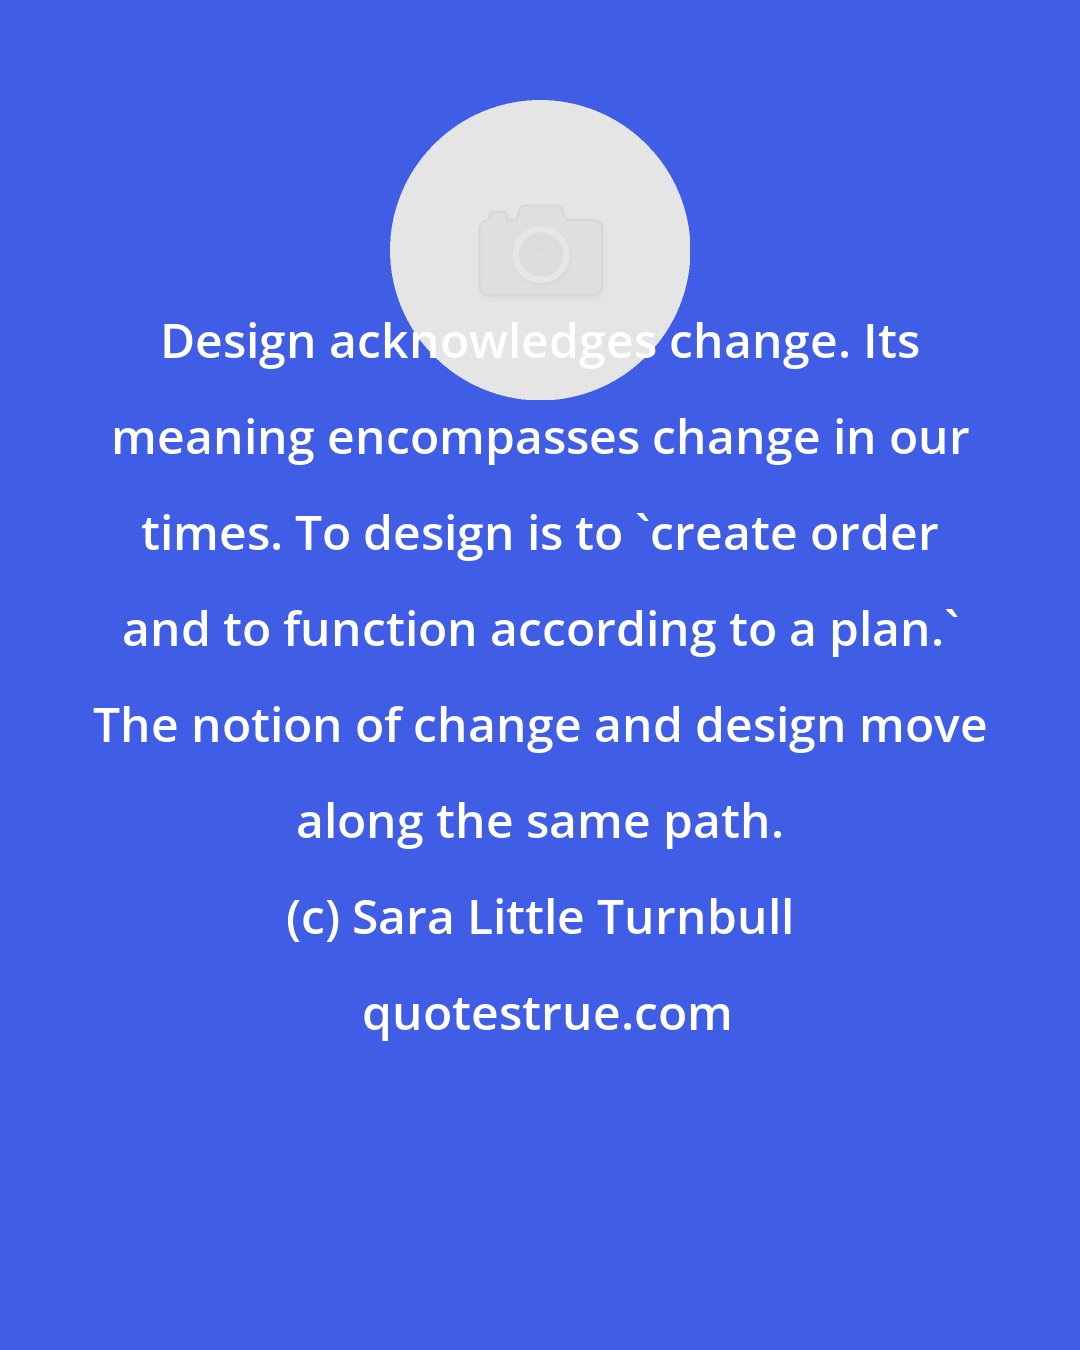 Sara Little Turnbull: Design acknowledges change. Its meaning encompasses change in our times. To design is to 'create order and to function according to a plan.' The notion of change and design move along the same path.